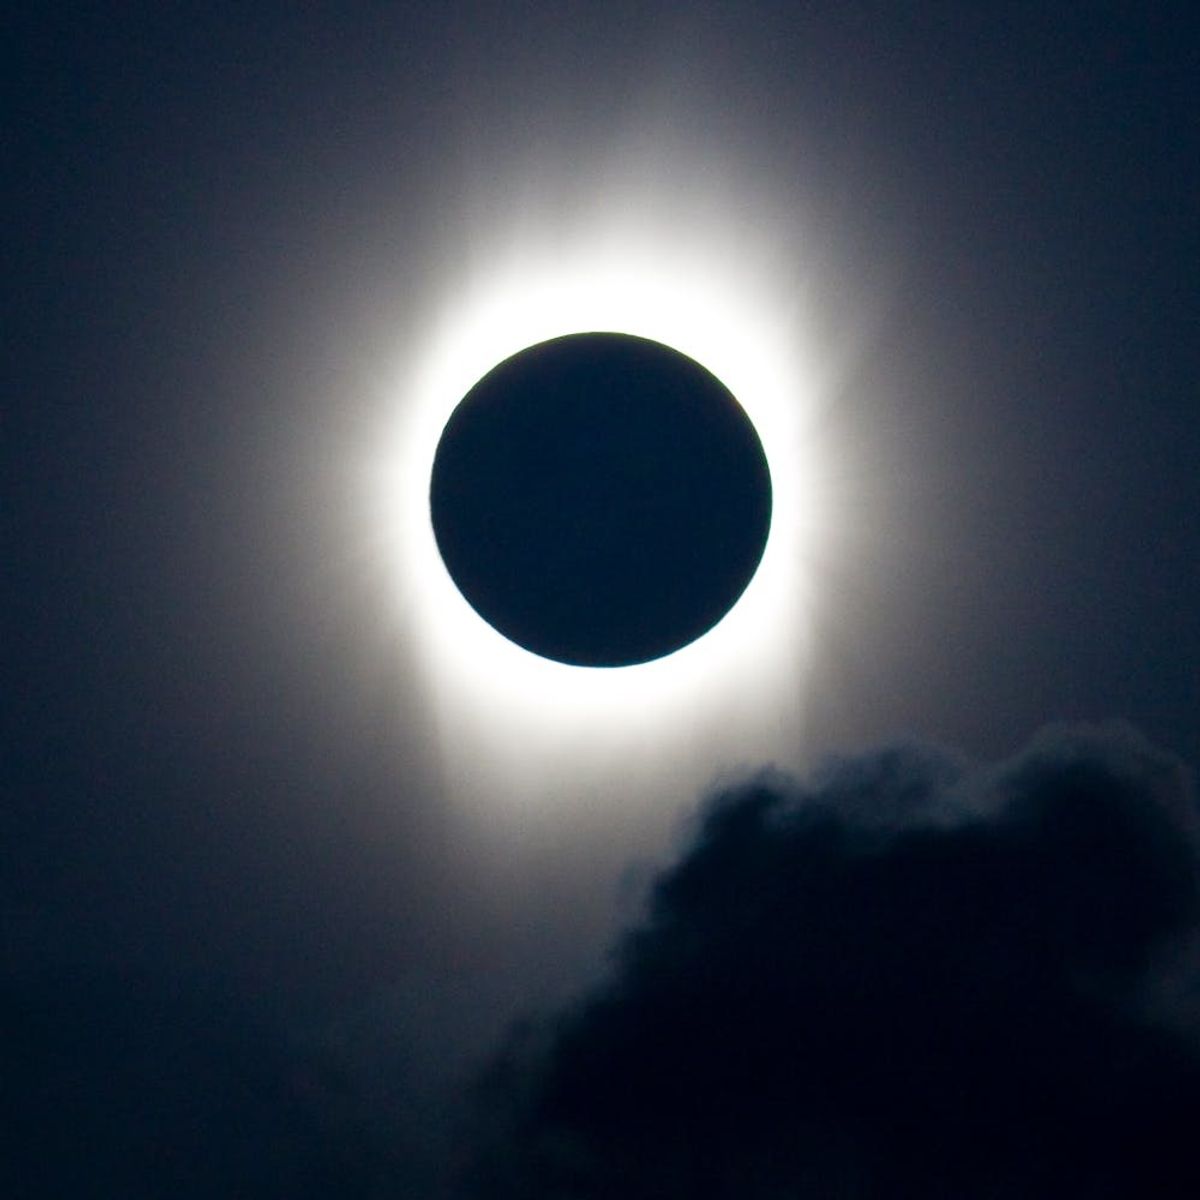 A Rare Total Solar Eclipse Will Be Visible from the US in 2017 and We Have the Deets You Need